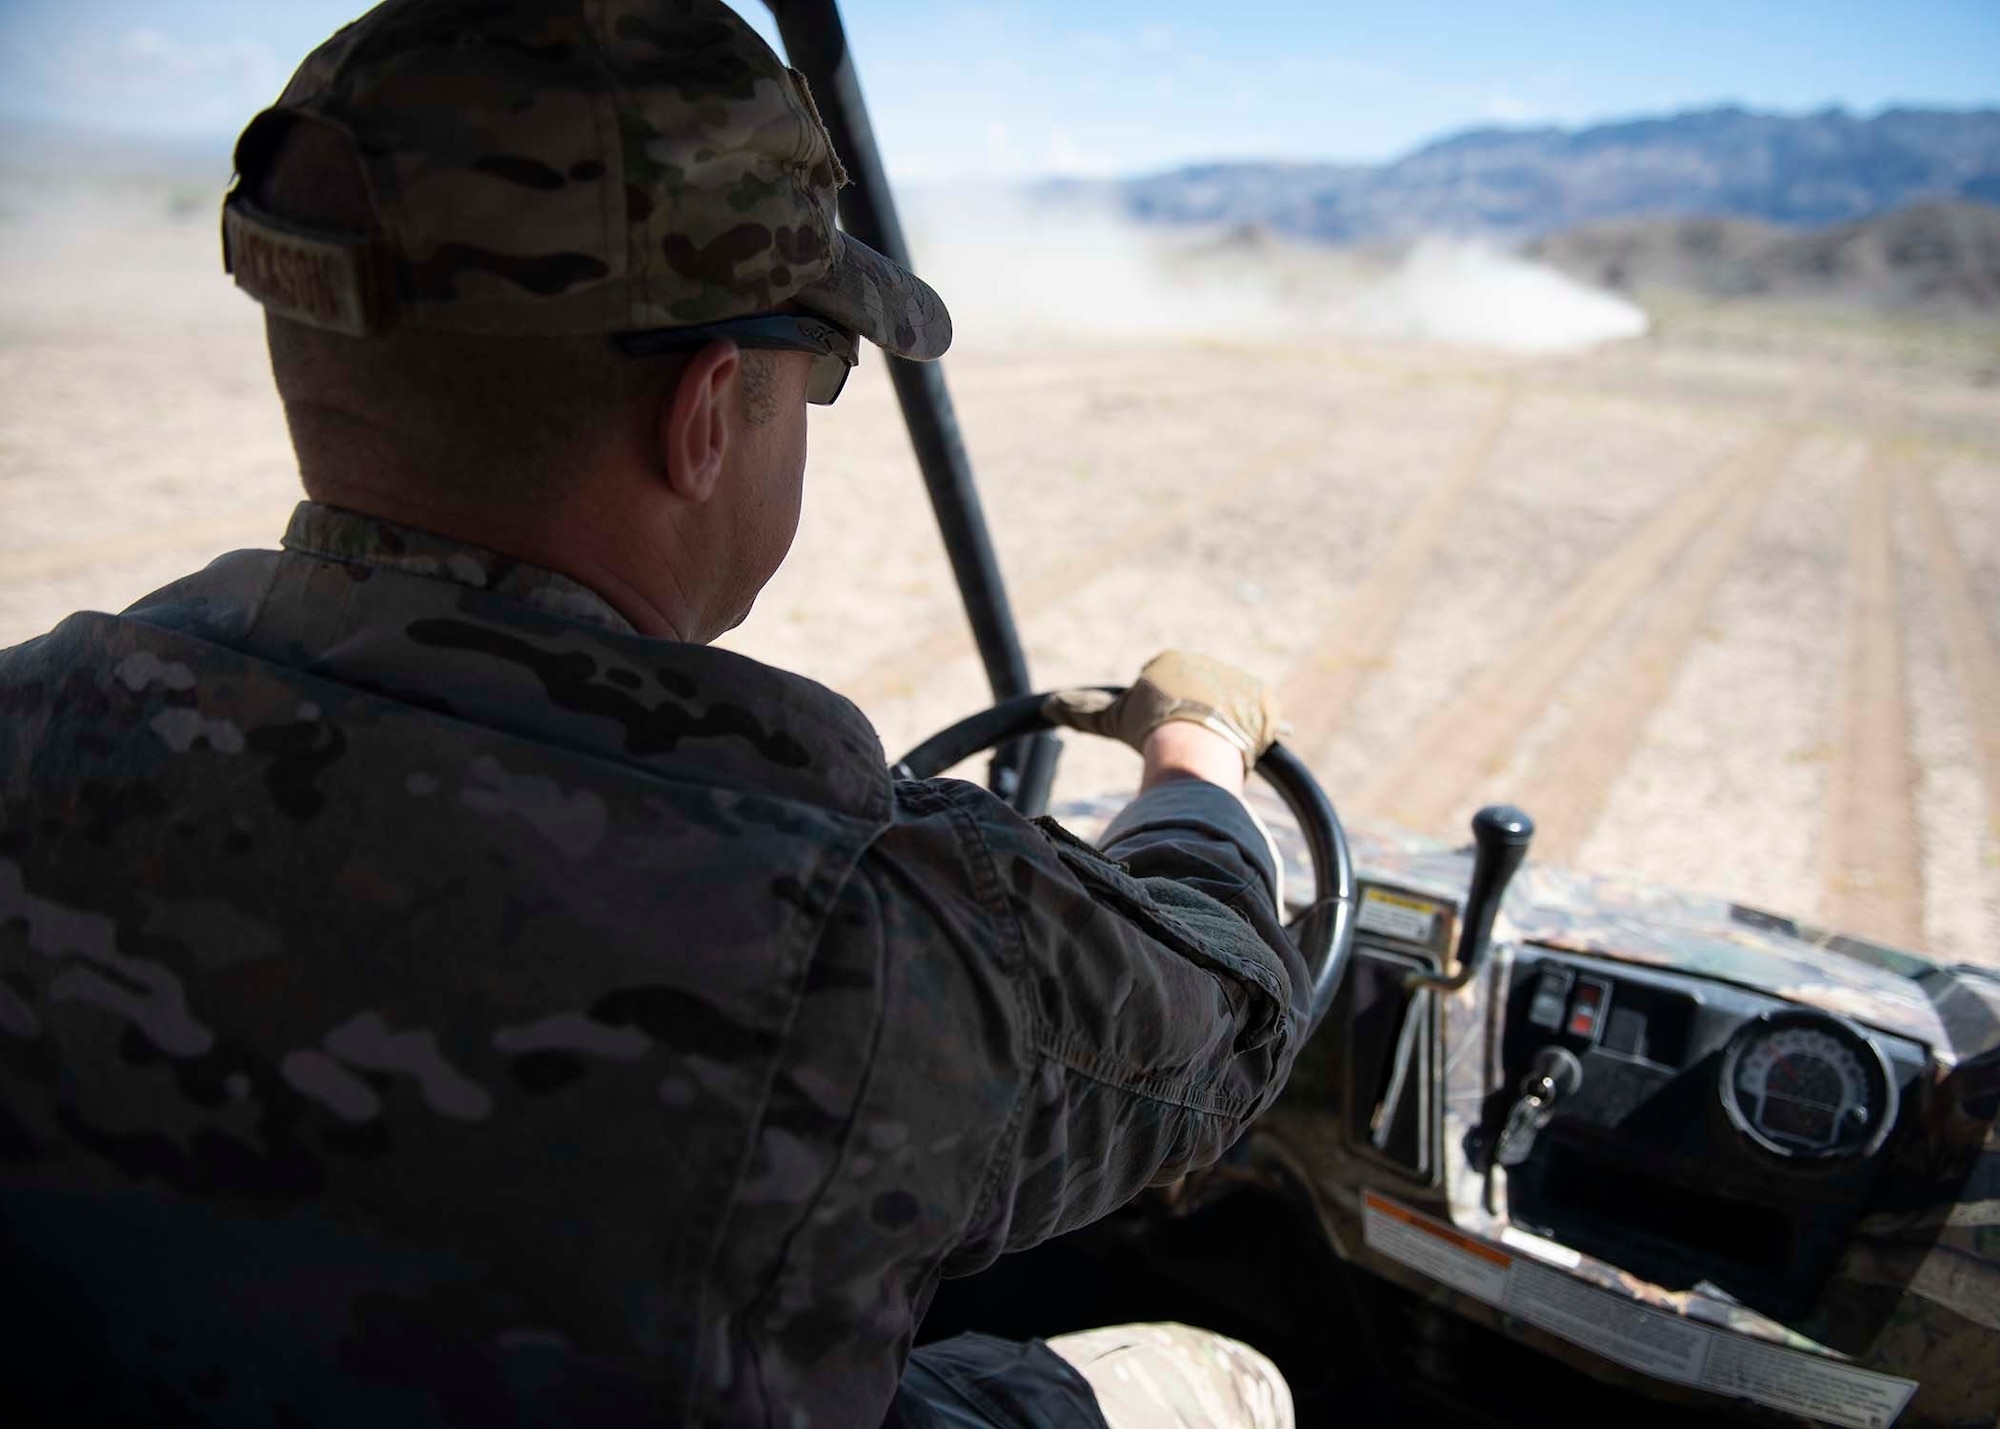 Explosive Ordnance Disposal technician drives a vehicle off road.